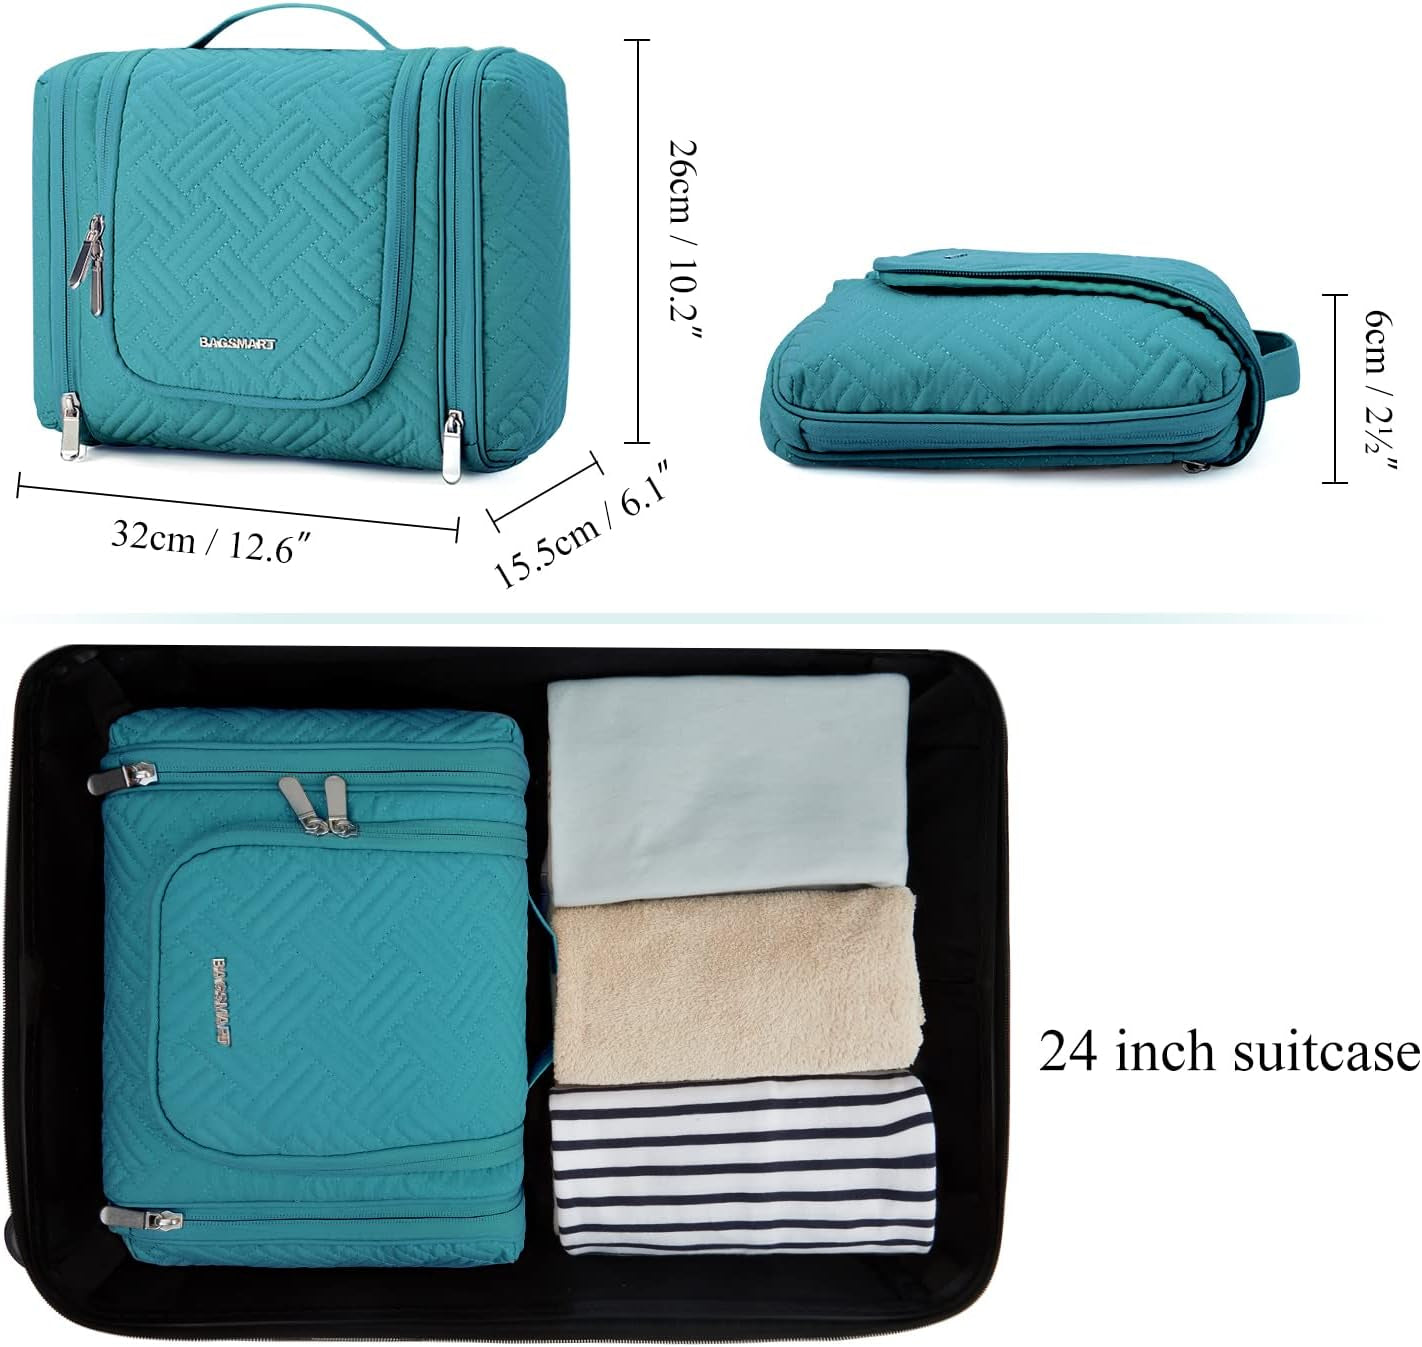 Large Travel Toiletry Bag for Women, Hanging Toiletry Bag with Hook, Travel Cosmetic Makeup Bag Travel Organizer for Accessories, Shampoo, Full Sized Container, Toiletries,Blue-Large